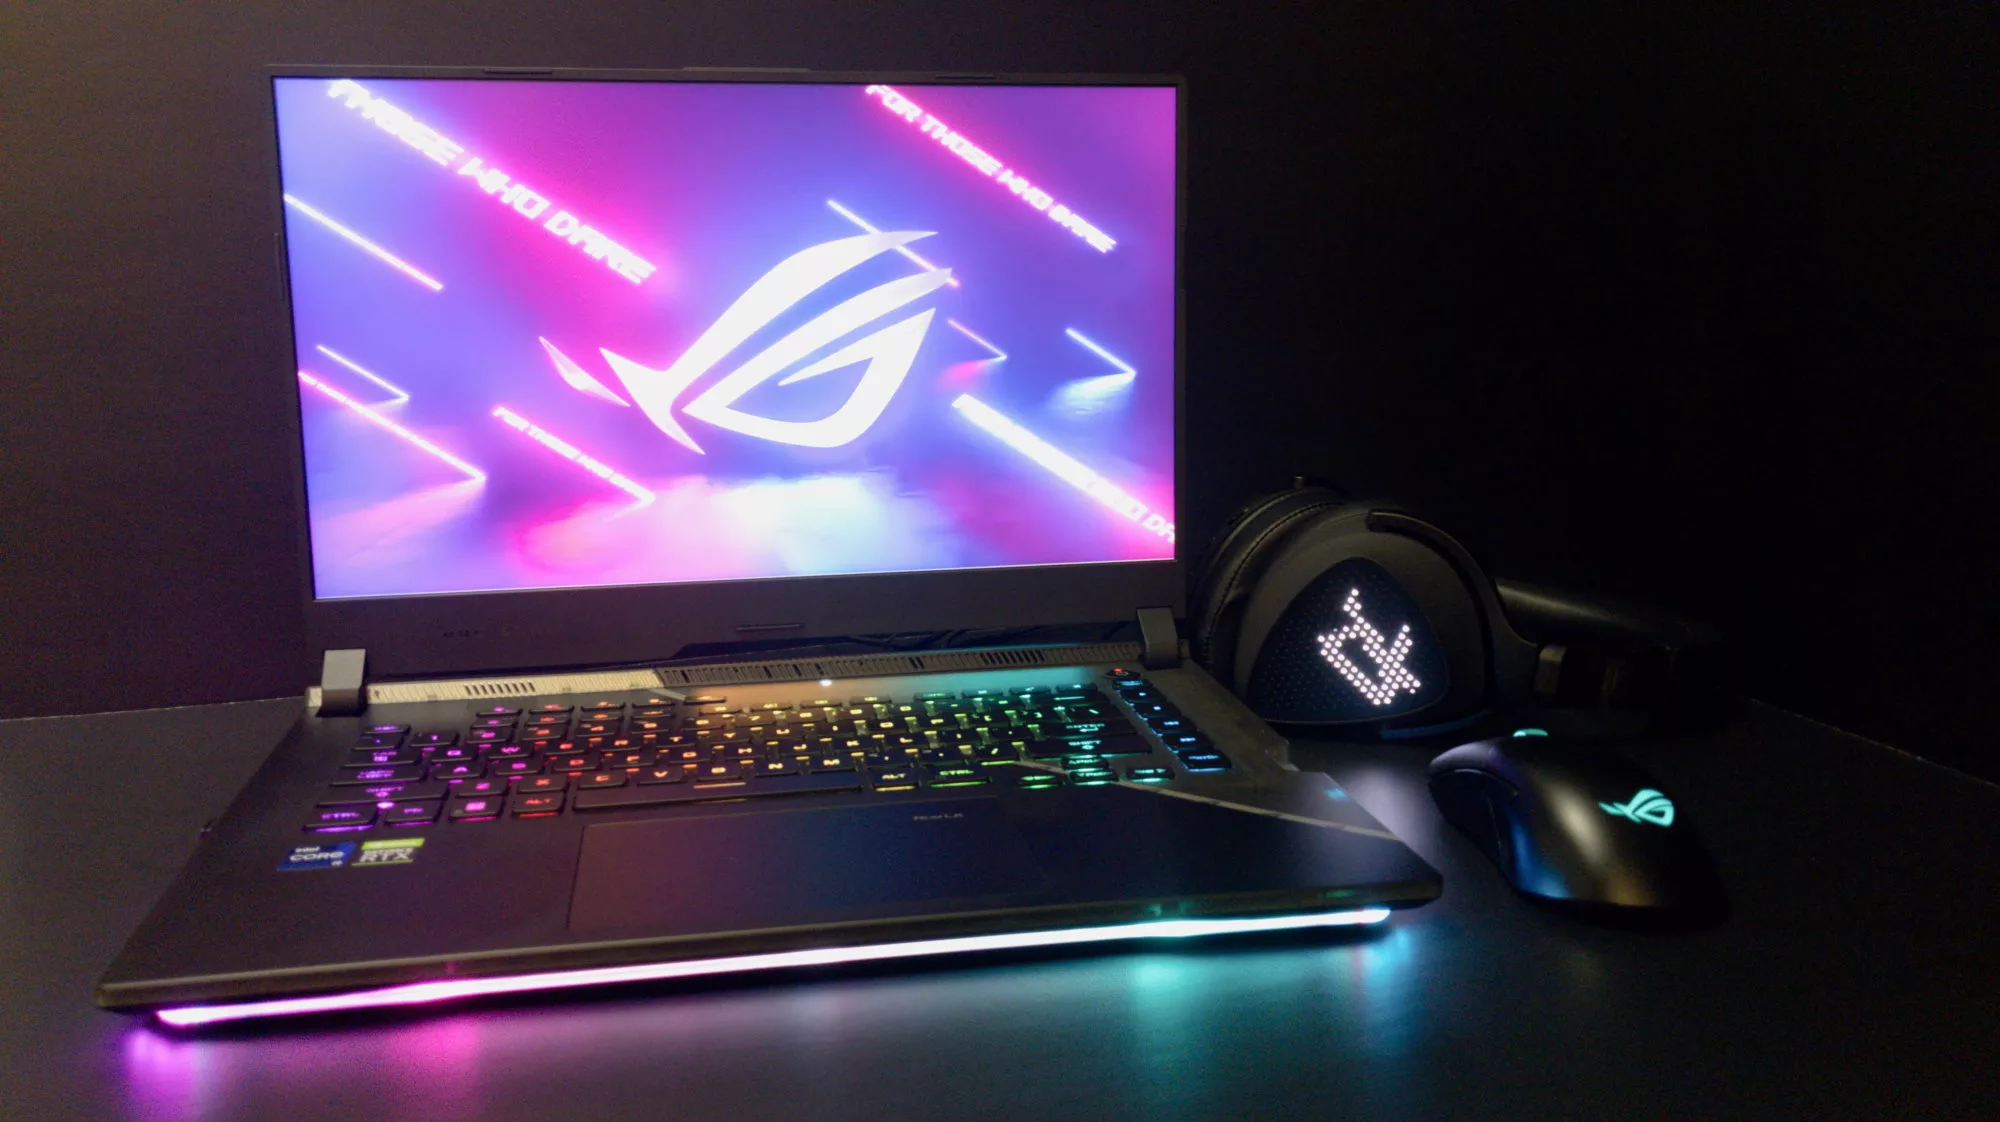 Ready to rumble right of the box: Hands-on with the ROG Strix SCAR 15